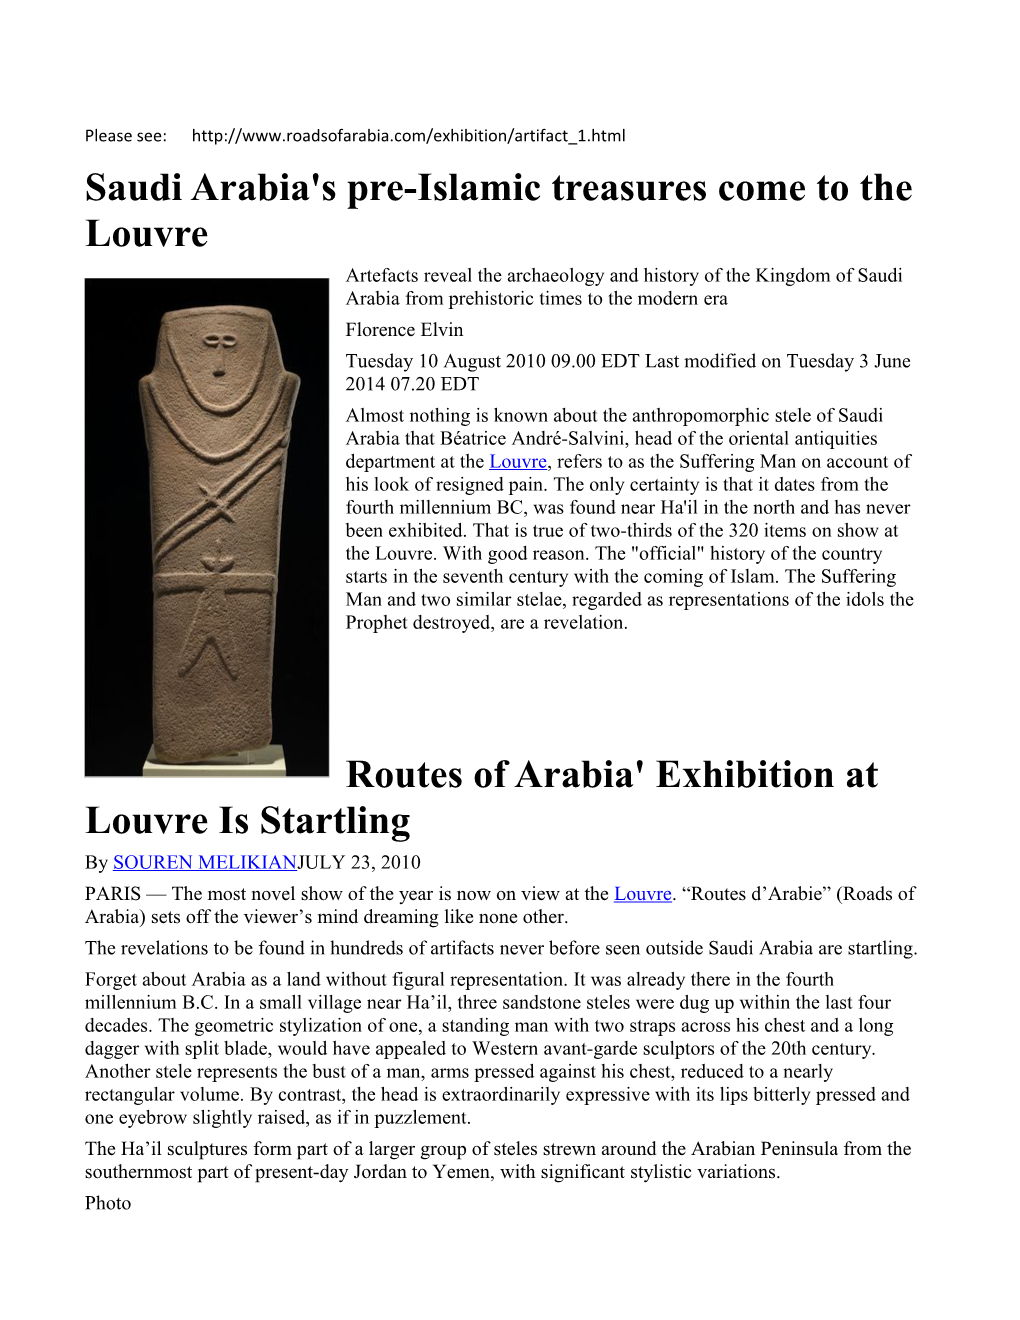 Routes of Arabia' Exhibition at Louvre Is Startling